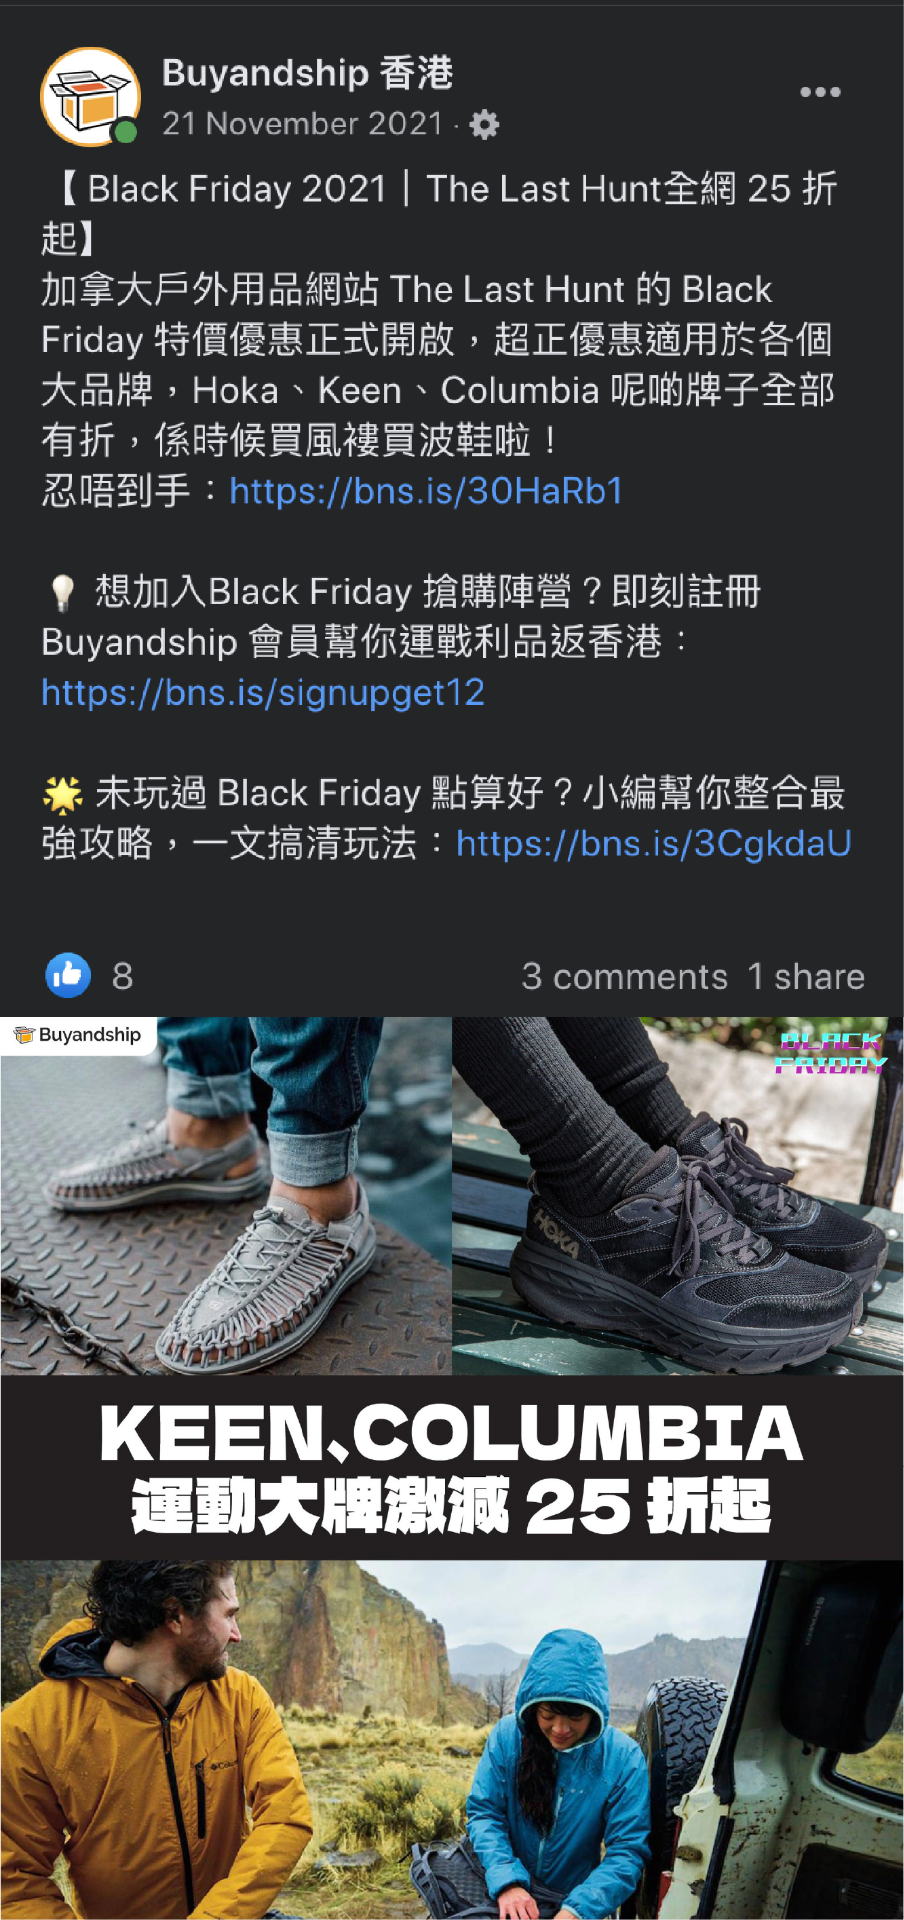 Social Media Post
- Graphic Design
- Feed Content (Cantonese and Taiwanese)